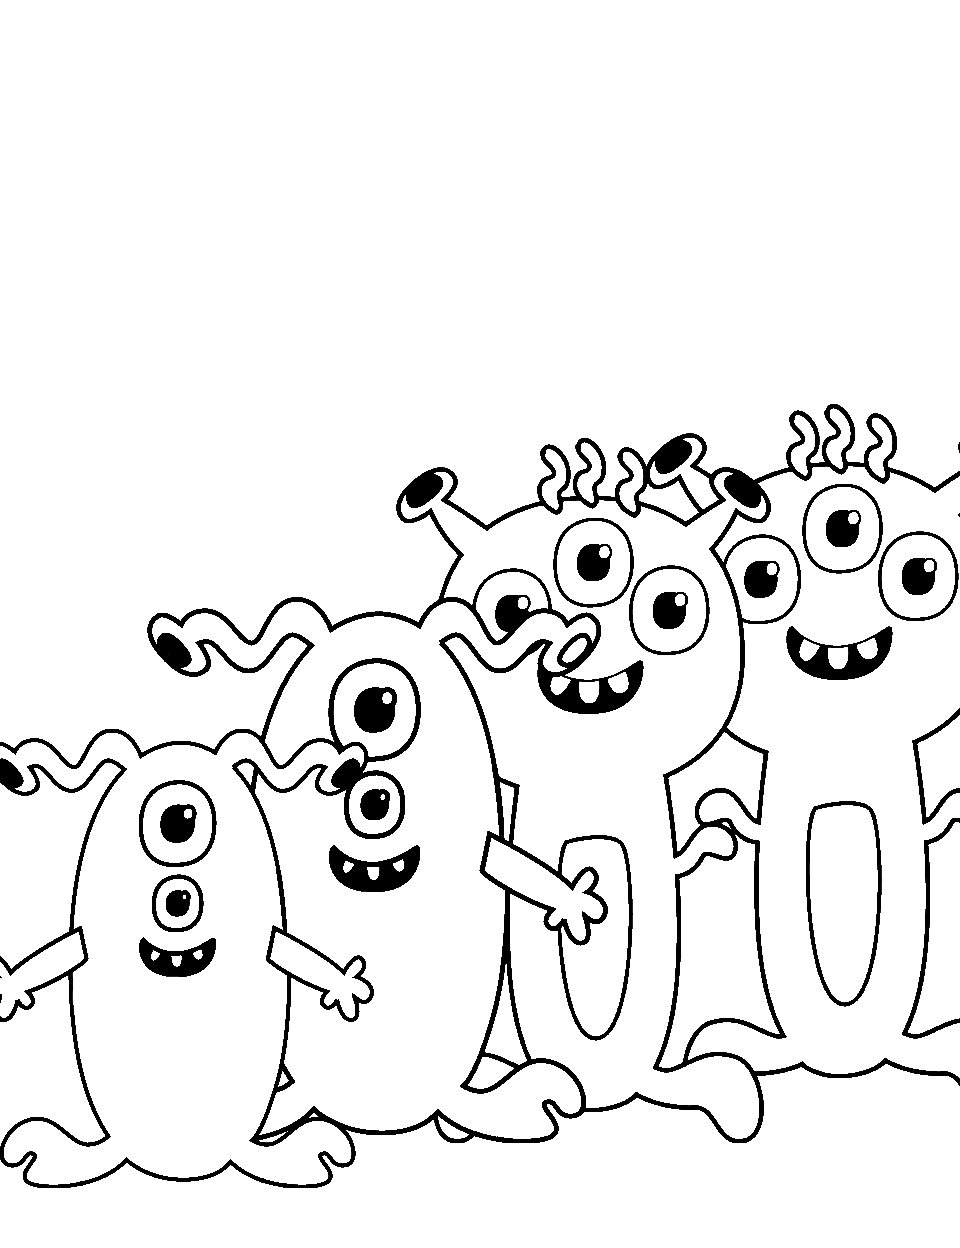 Cartoon Alien Parade Coloring Page - A line of cartoon aliens marching in a parade.